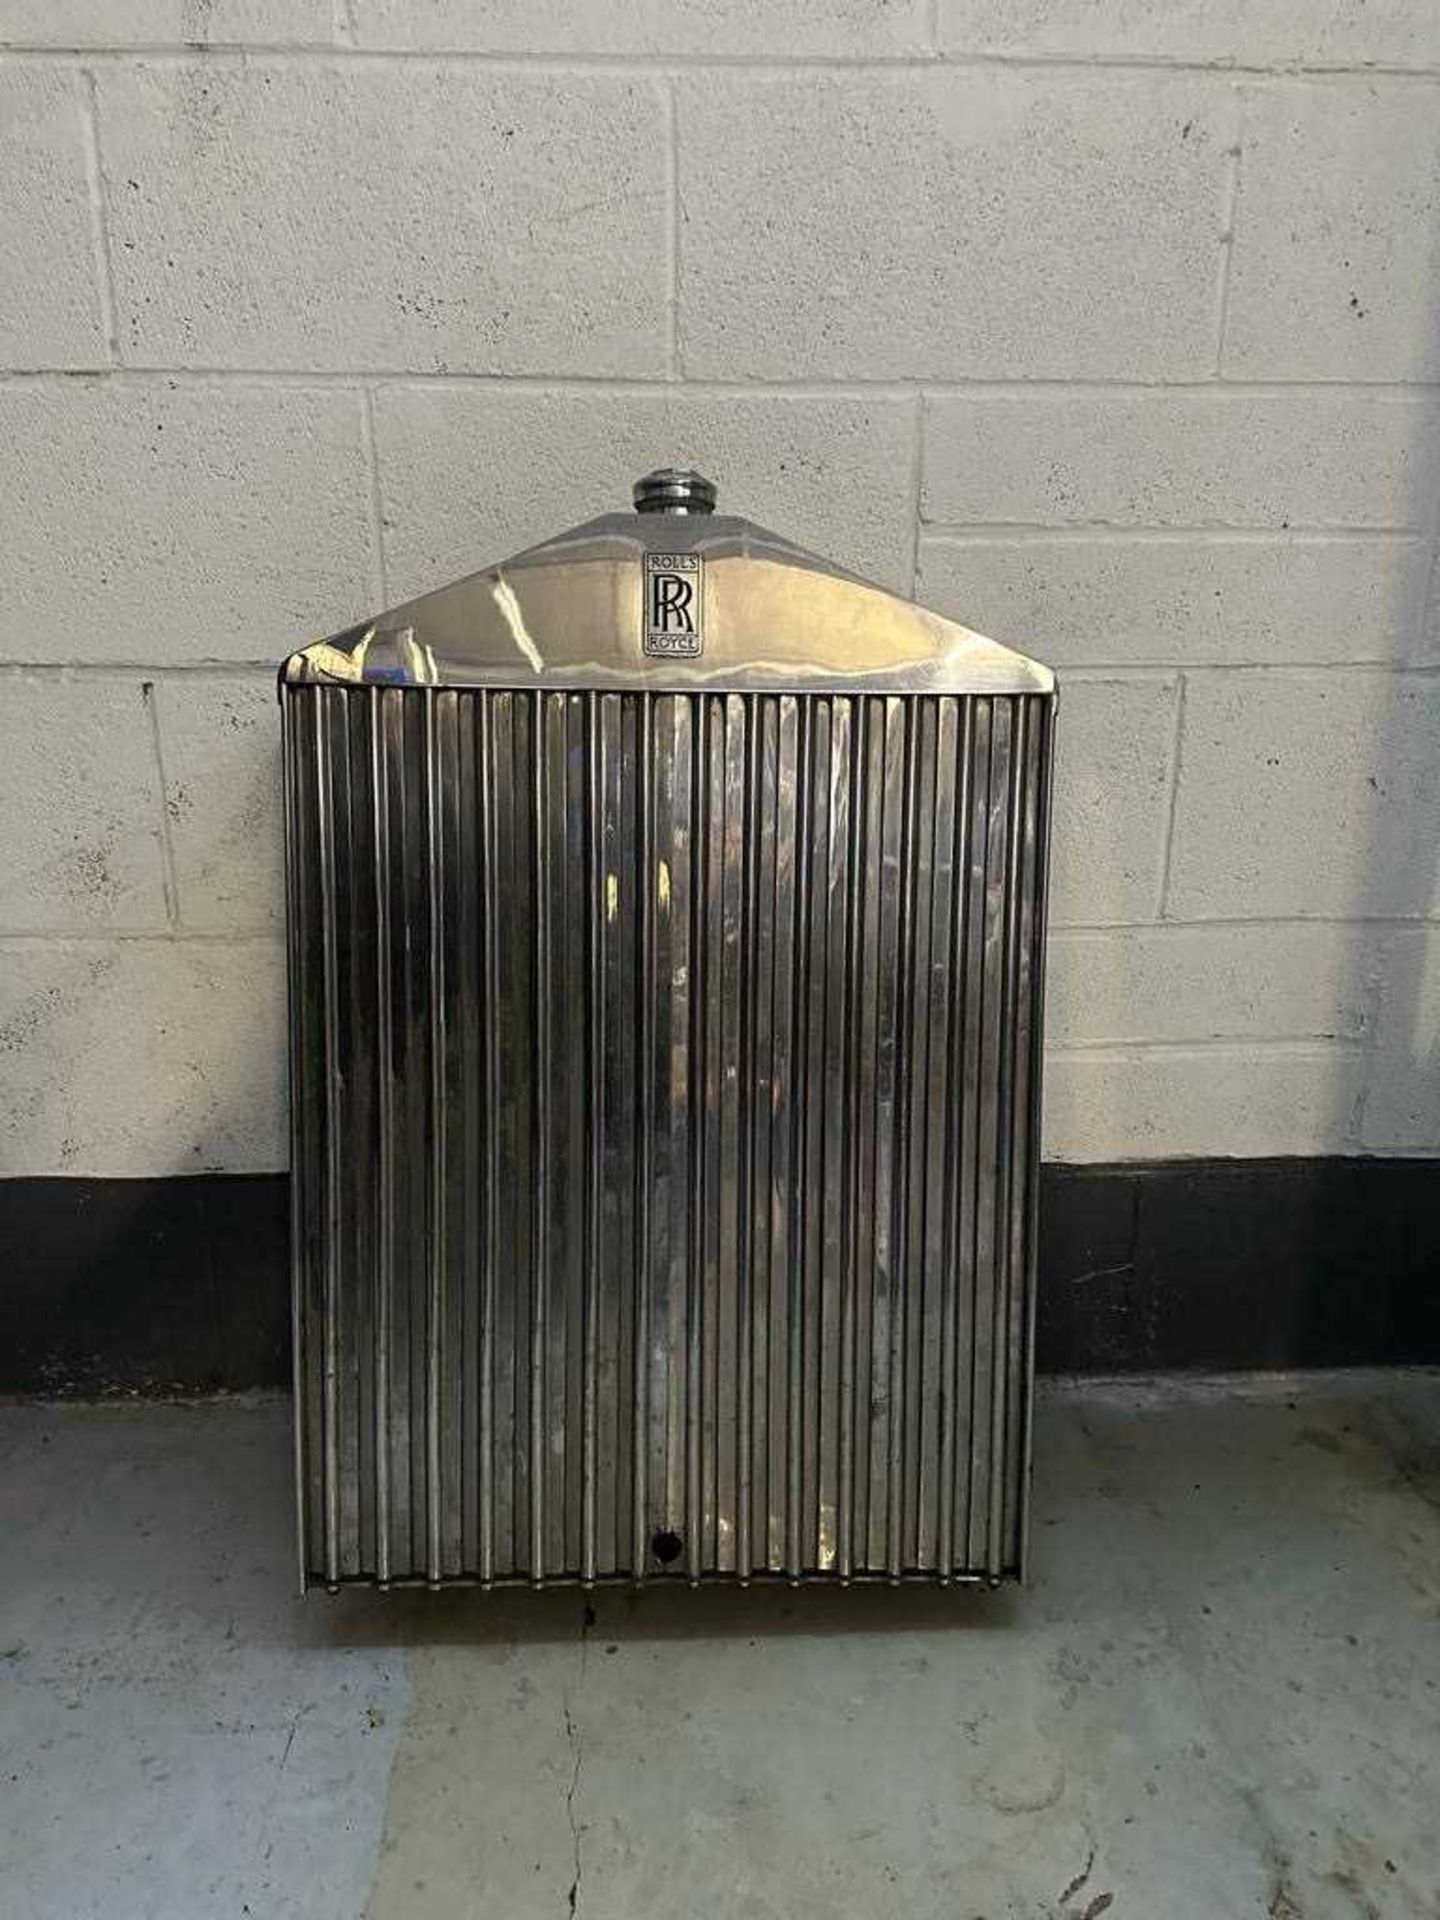 A VINTAGE ROLLS ROYCE RADIATOR AND GRILL - Image 2 of 5